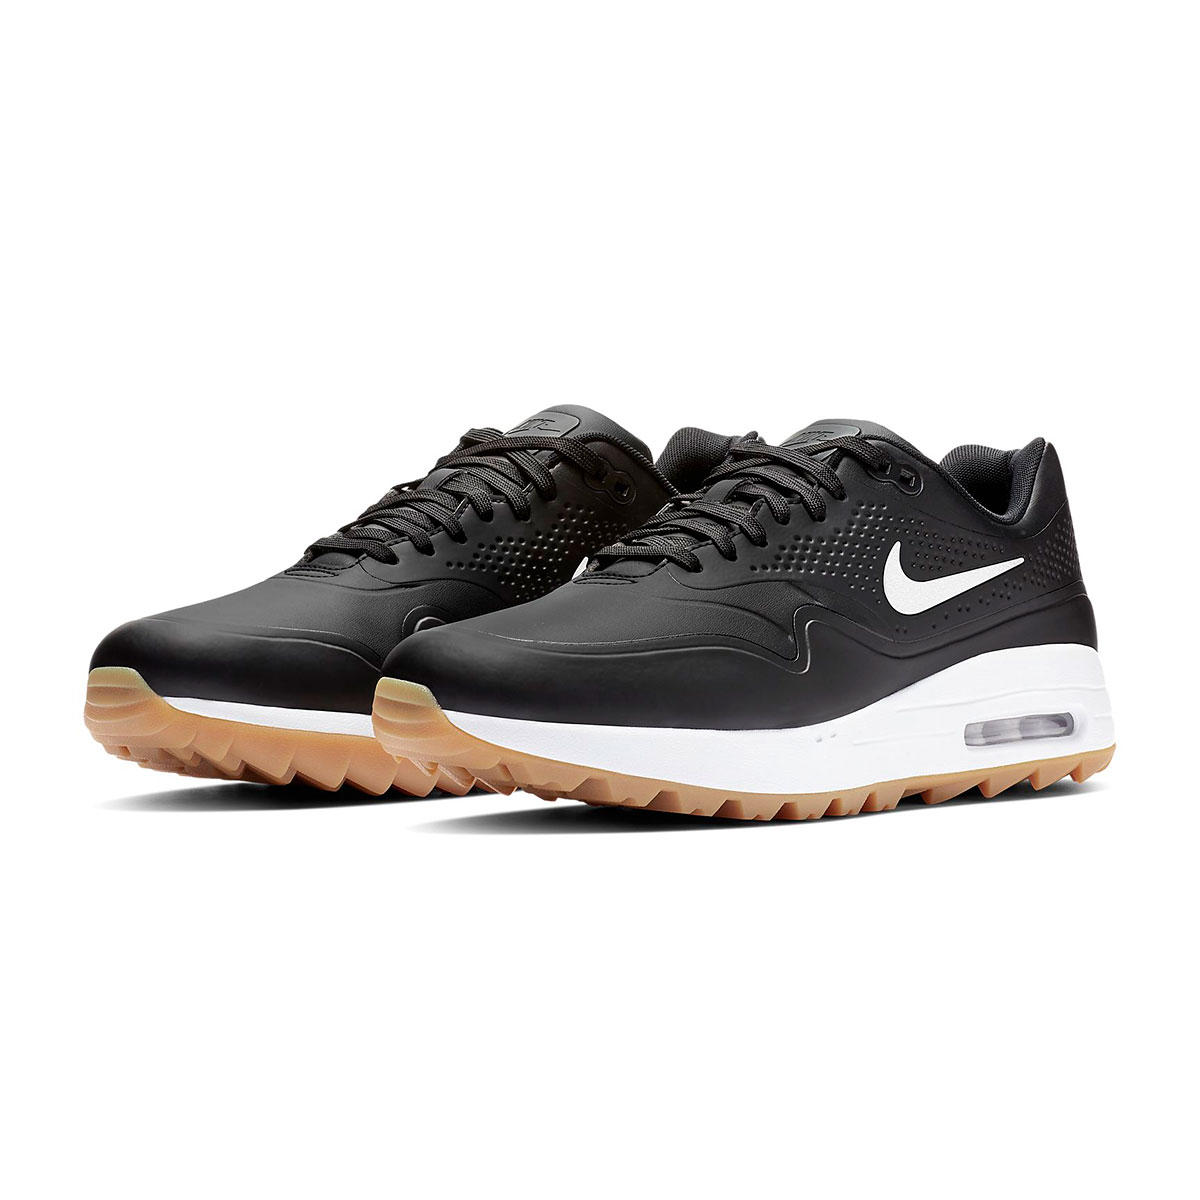 Nike Air Max 1G Shoes from american golf